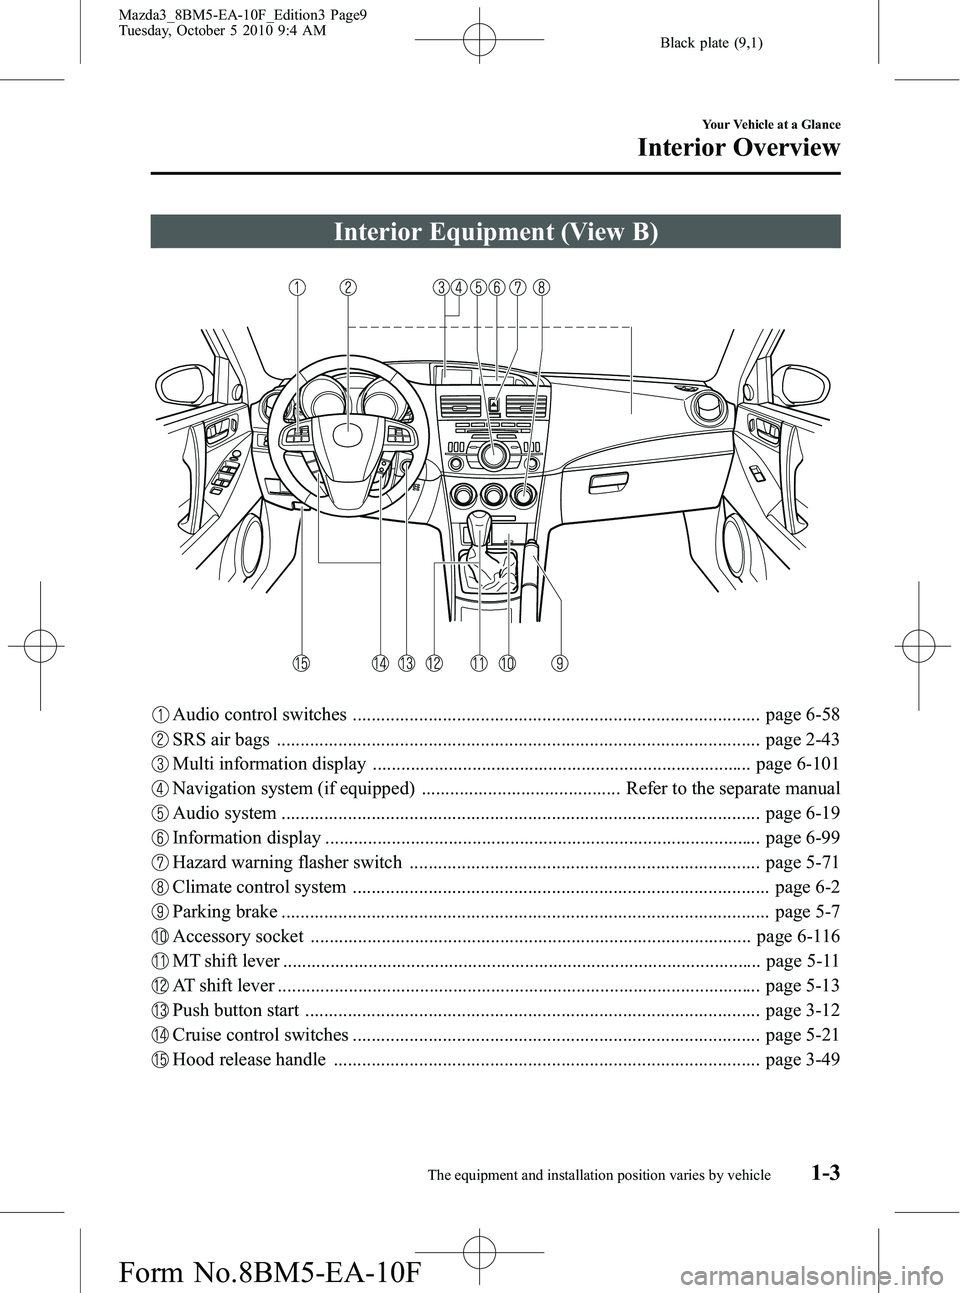 MAZDA MODEL 3 4-DOOR 2011  Owners Manual Black plate (9,1)
Interior Equipment (View B)
Audio control switches ...................................................................................... page 6-58
SRS air bags .....................